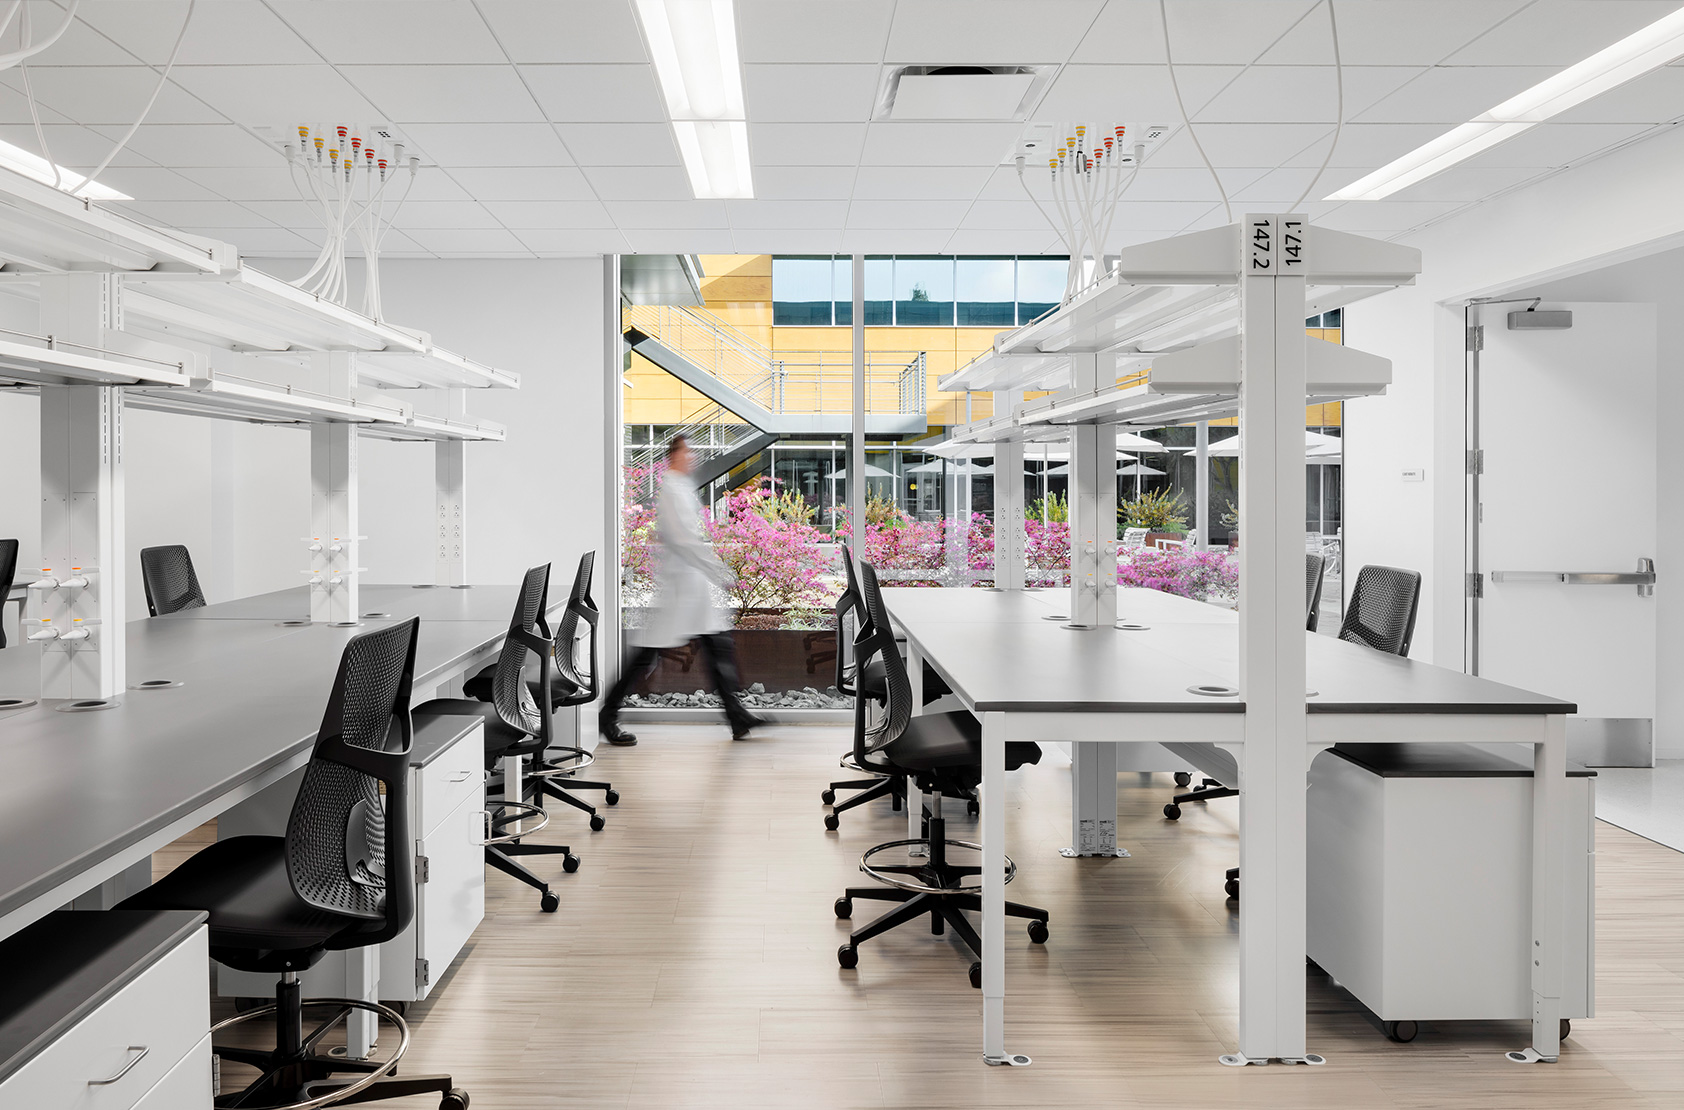 Confidential Client - School of Medicine Laboratory and Office Renovation